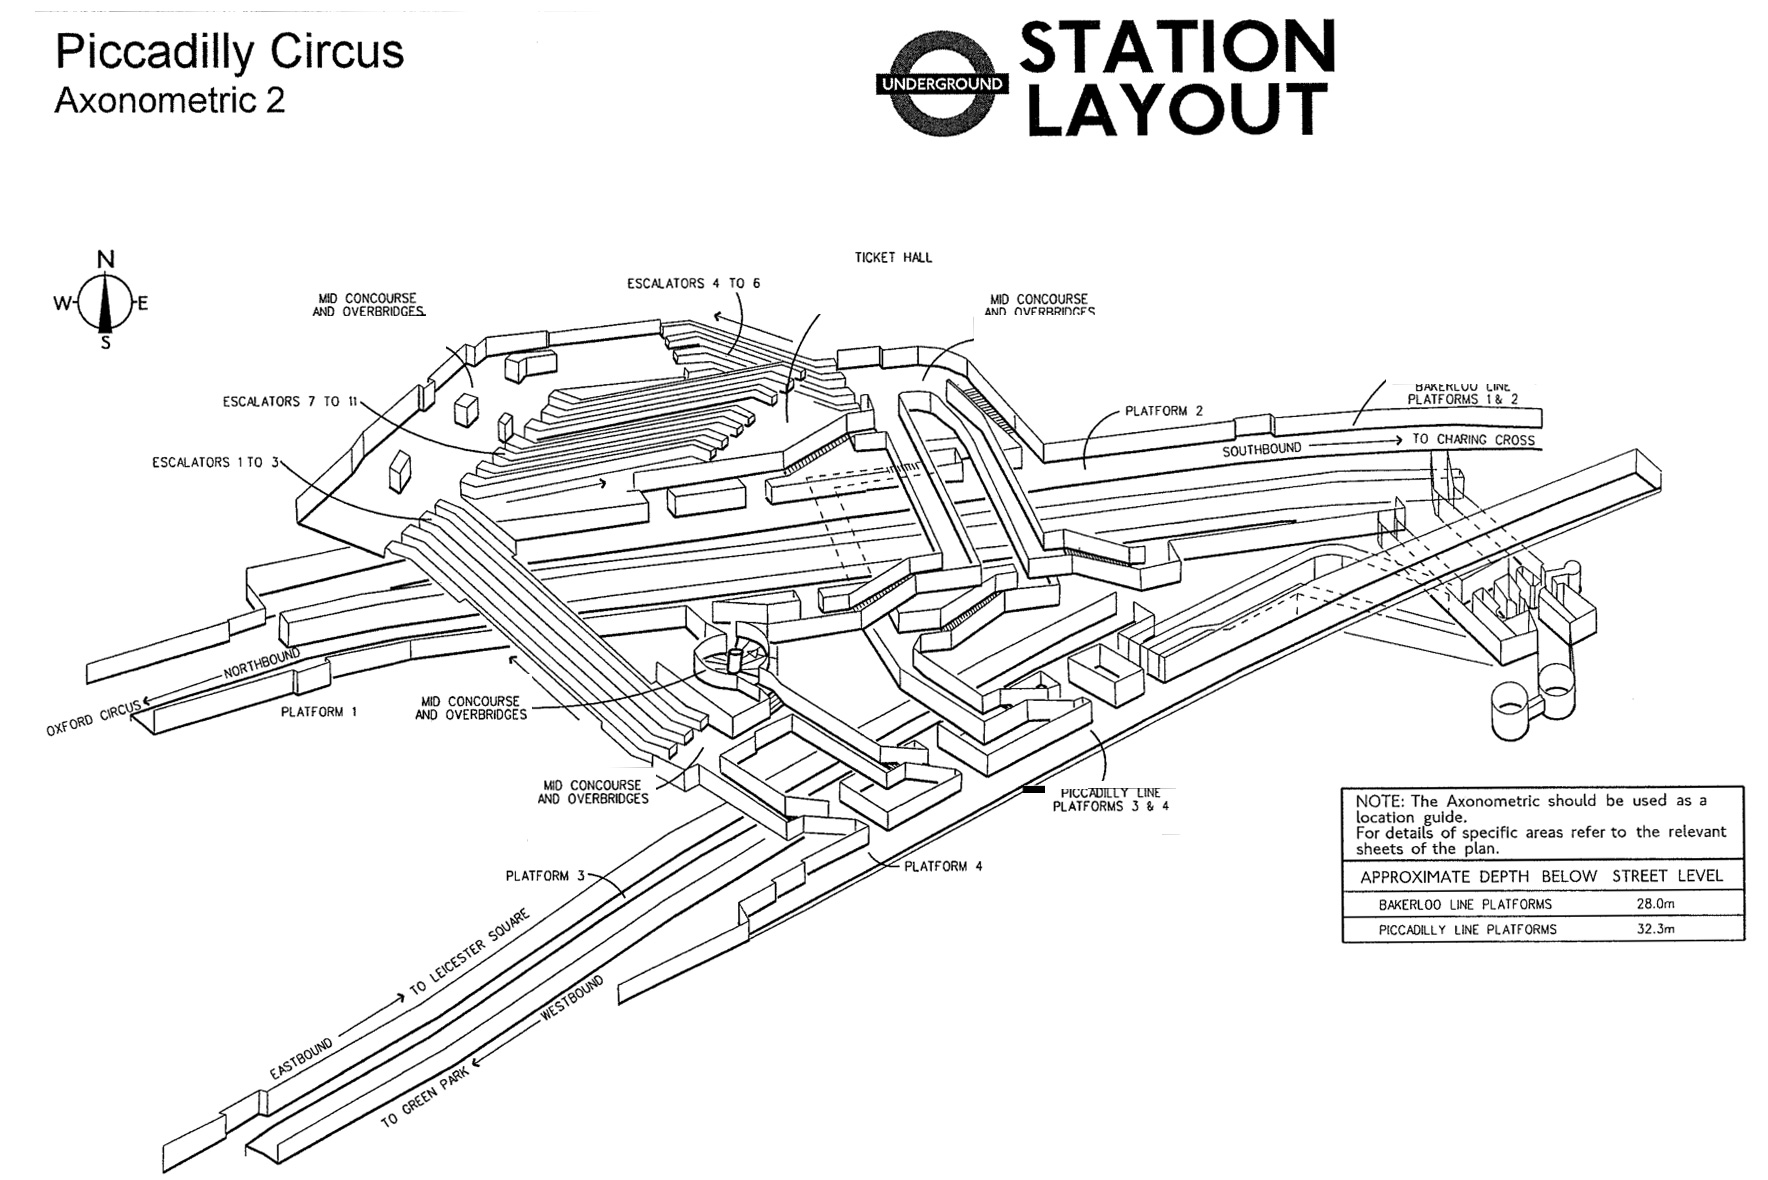 diagramme-3d-station-metro-londres-picadilly-circus-platforms-11